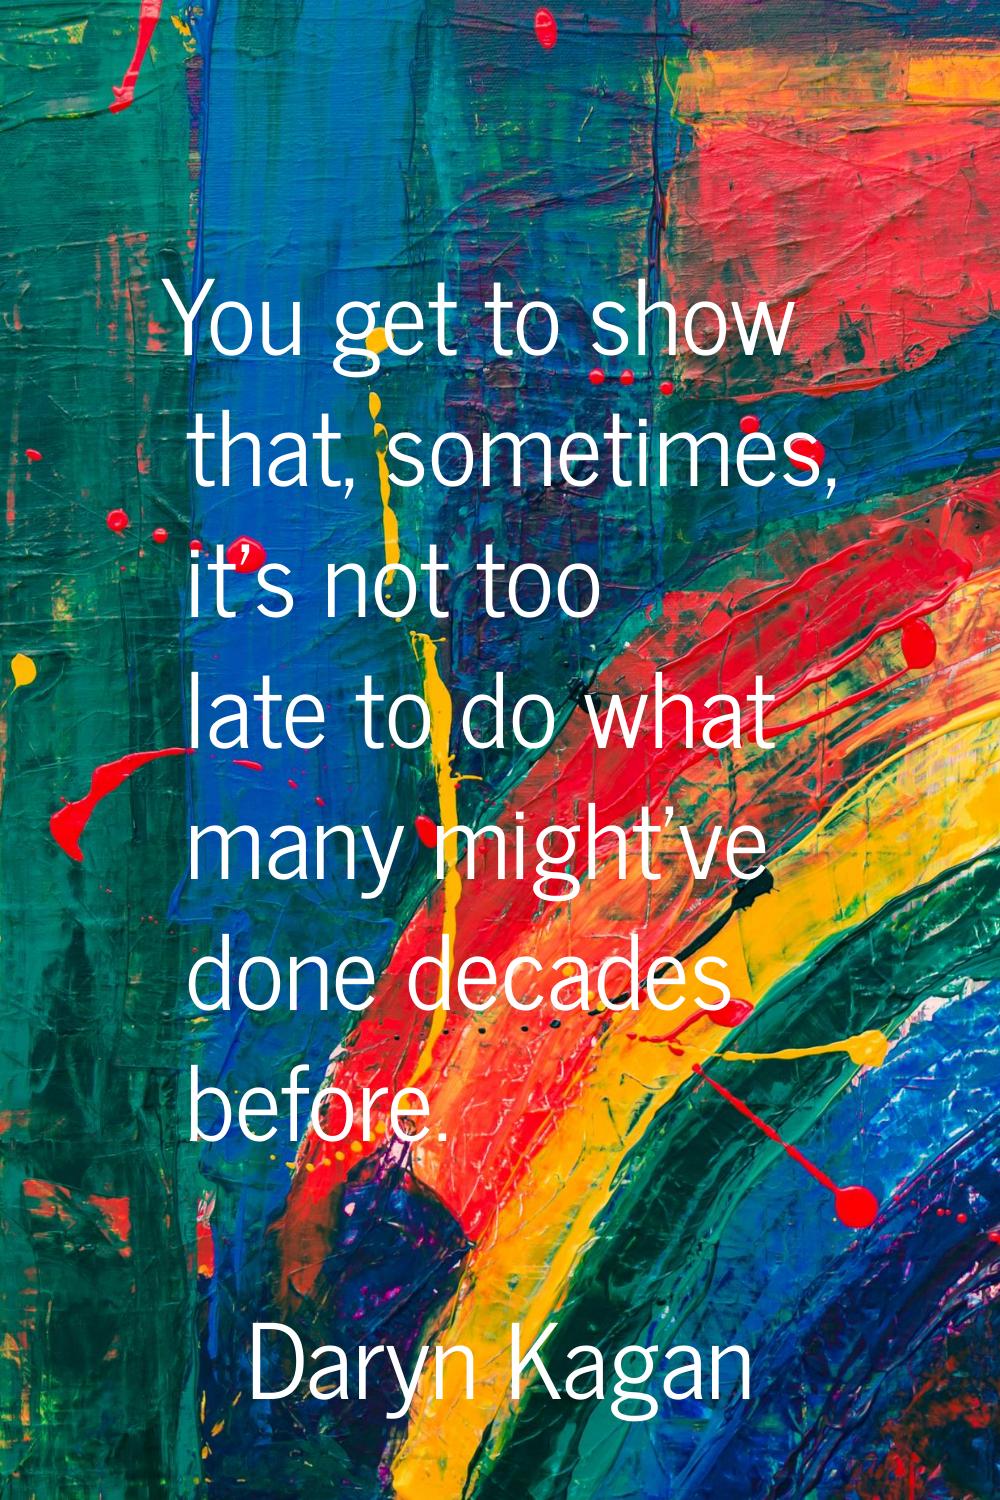 You get to show that, sometimes, it's not too late to do what many might've done decades before.